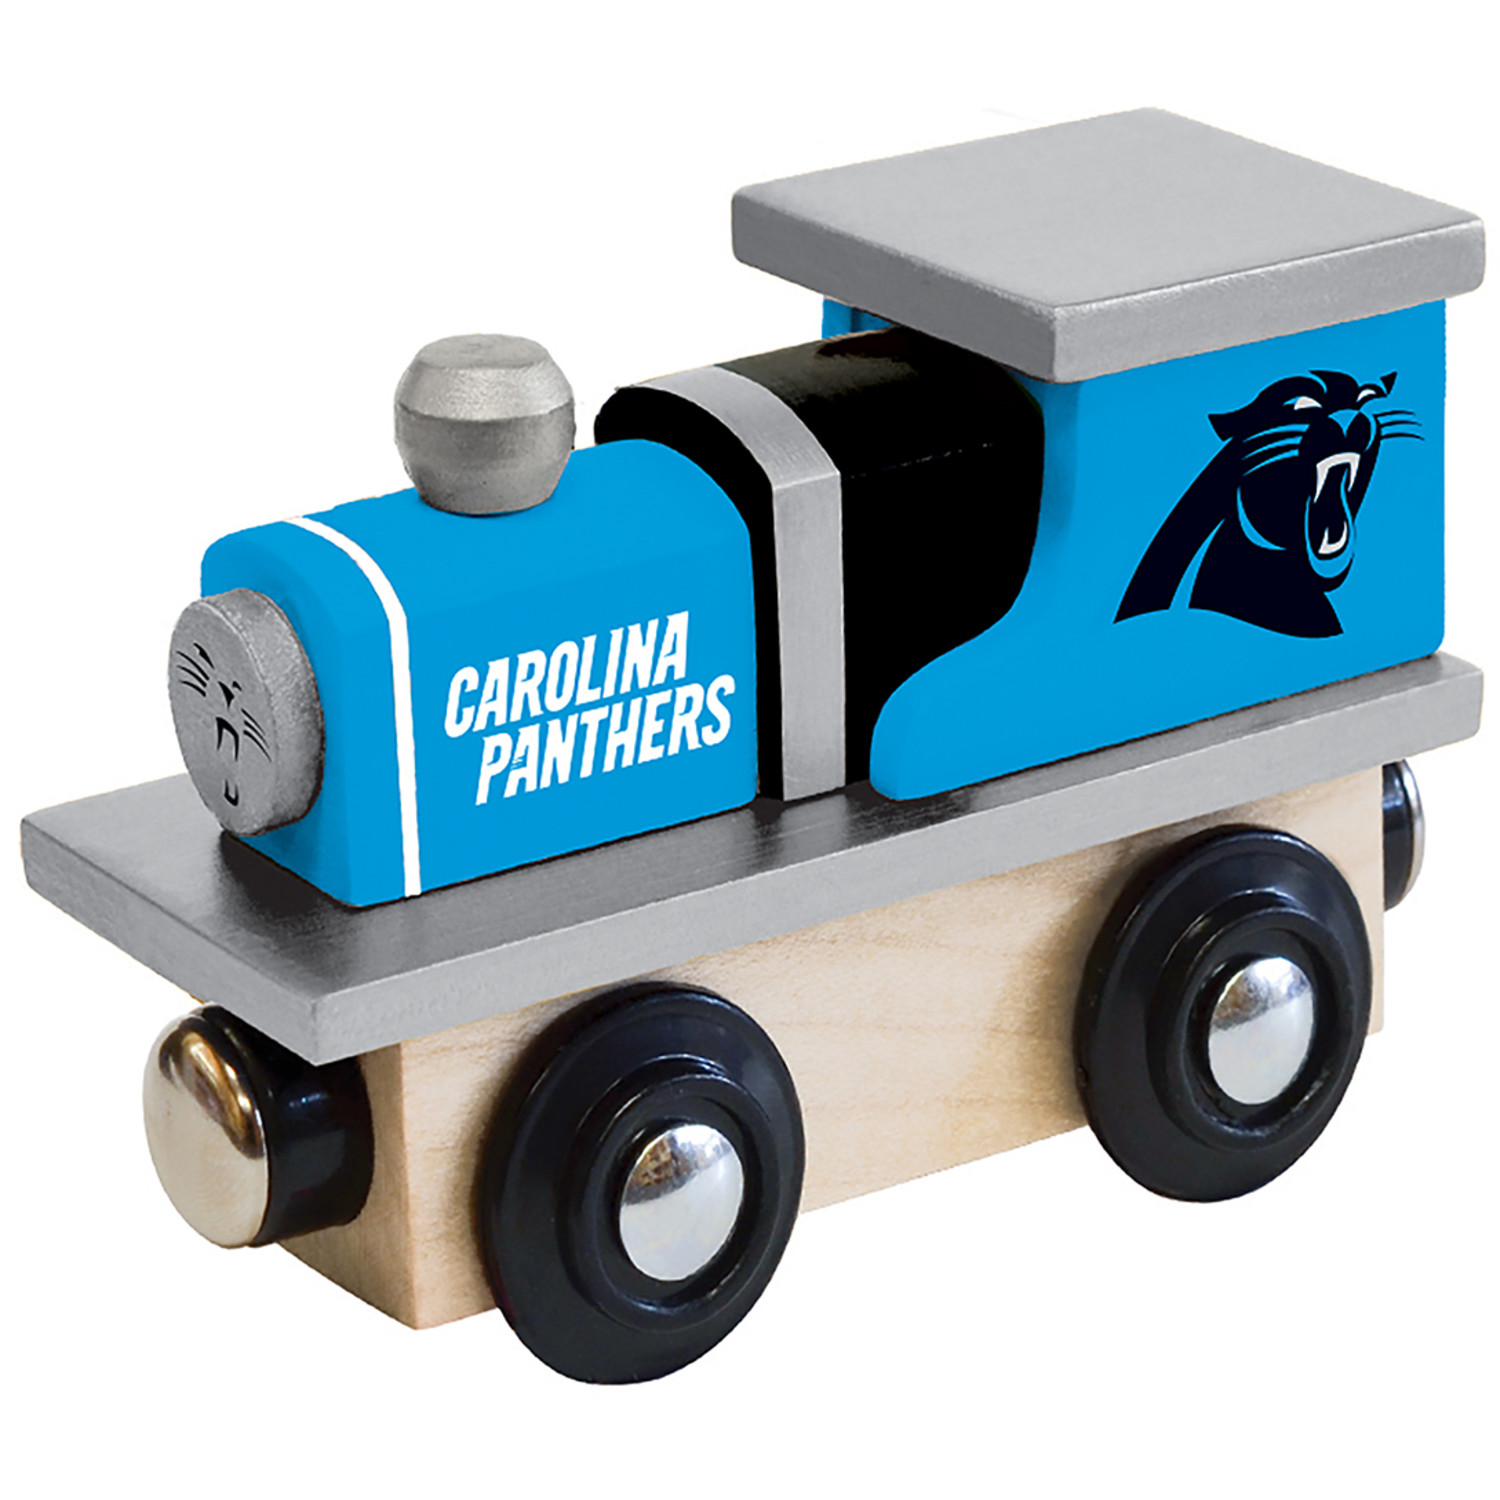 MasterPieces Officially Licensed NFL Carolina Panthers Wooden Toy Train Engine For Kids - image 2 of 4